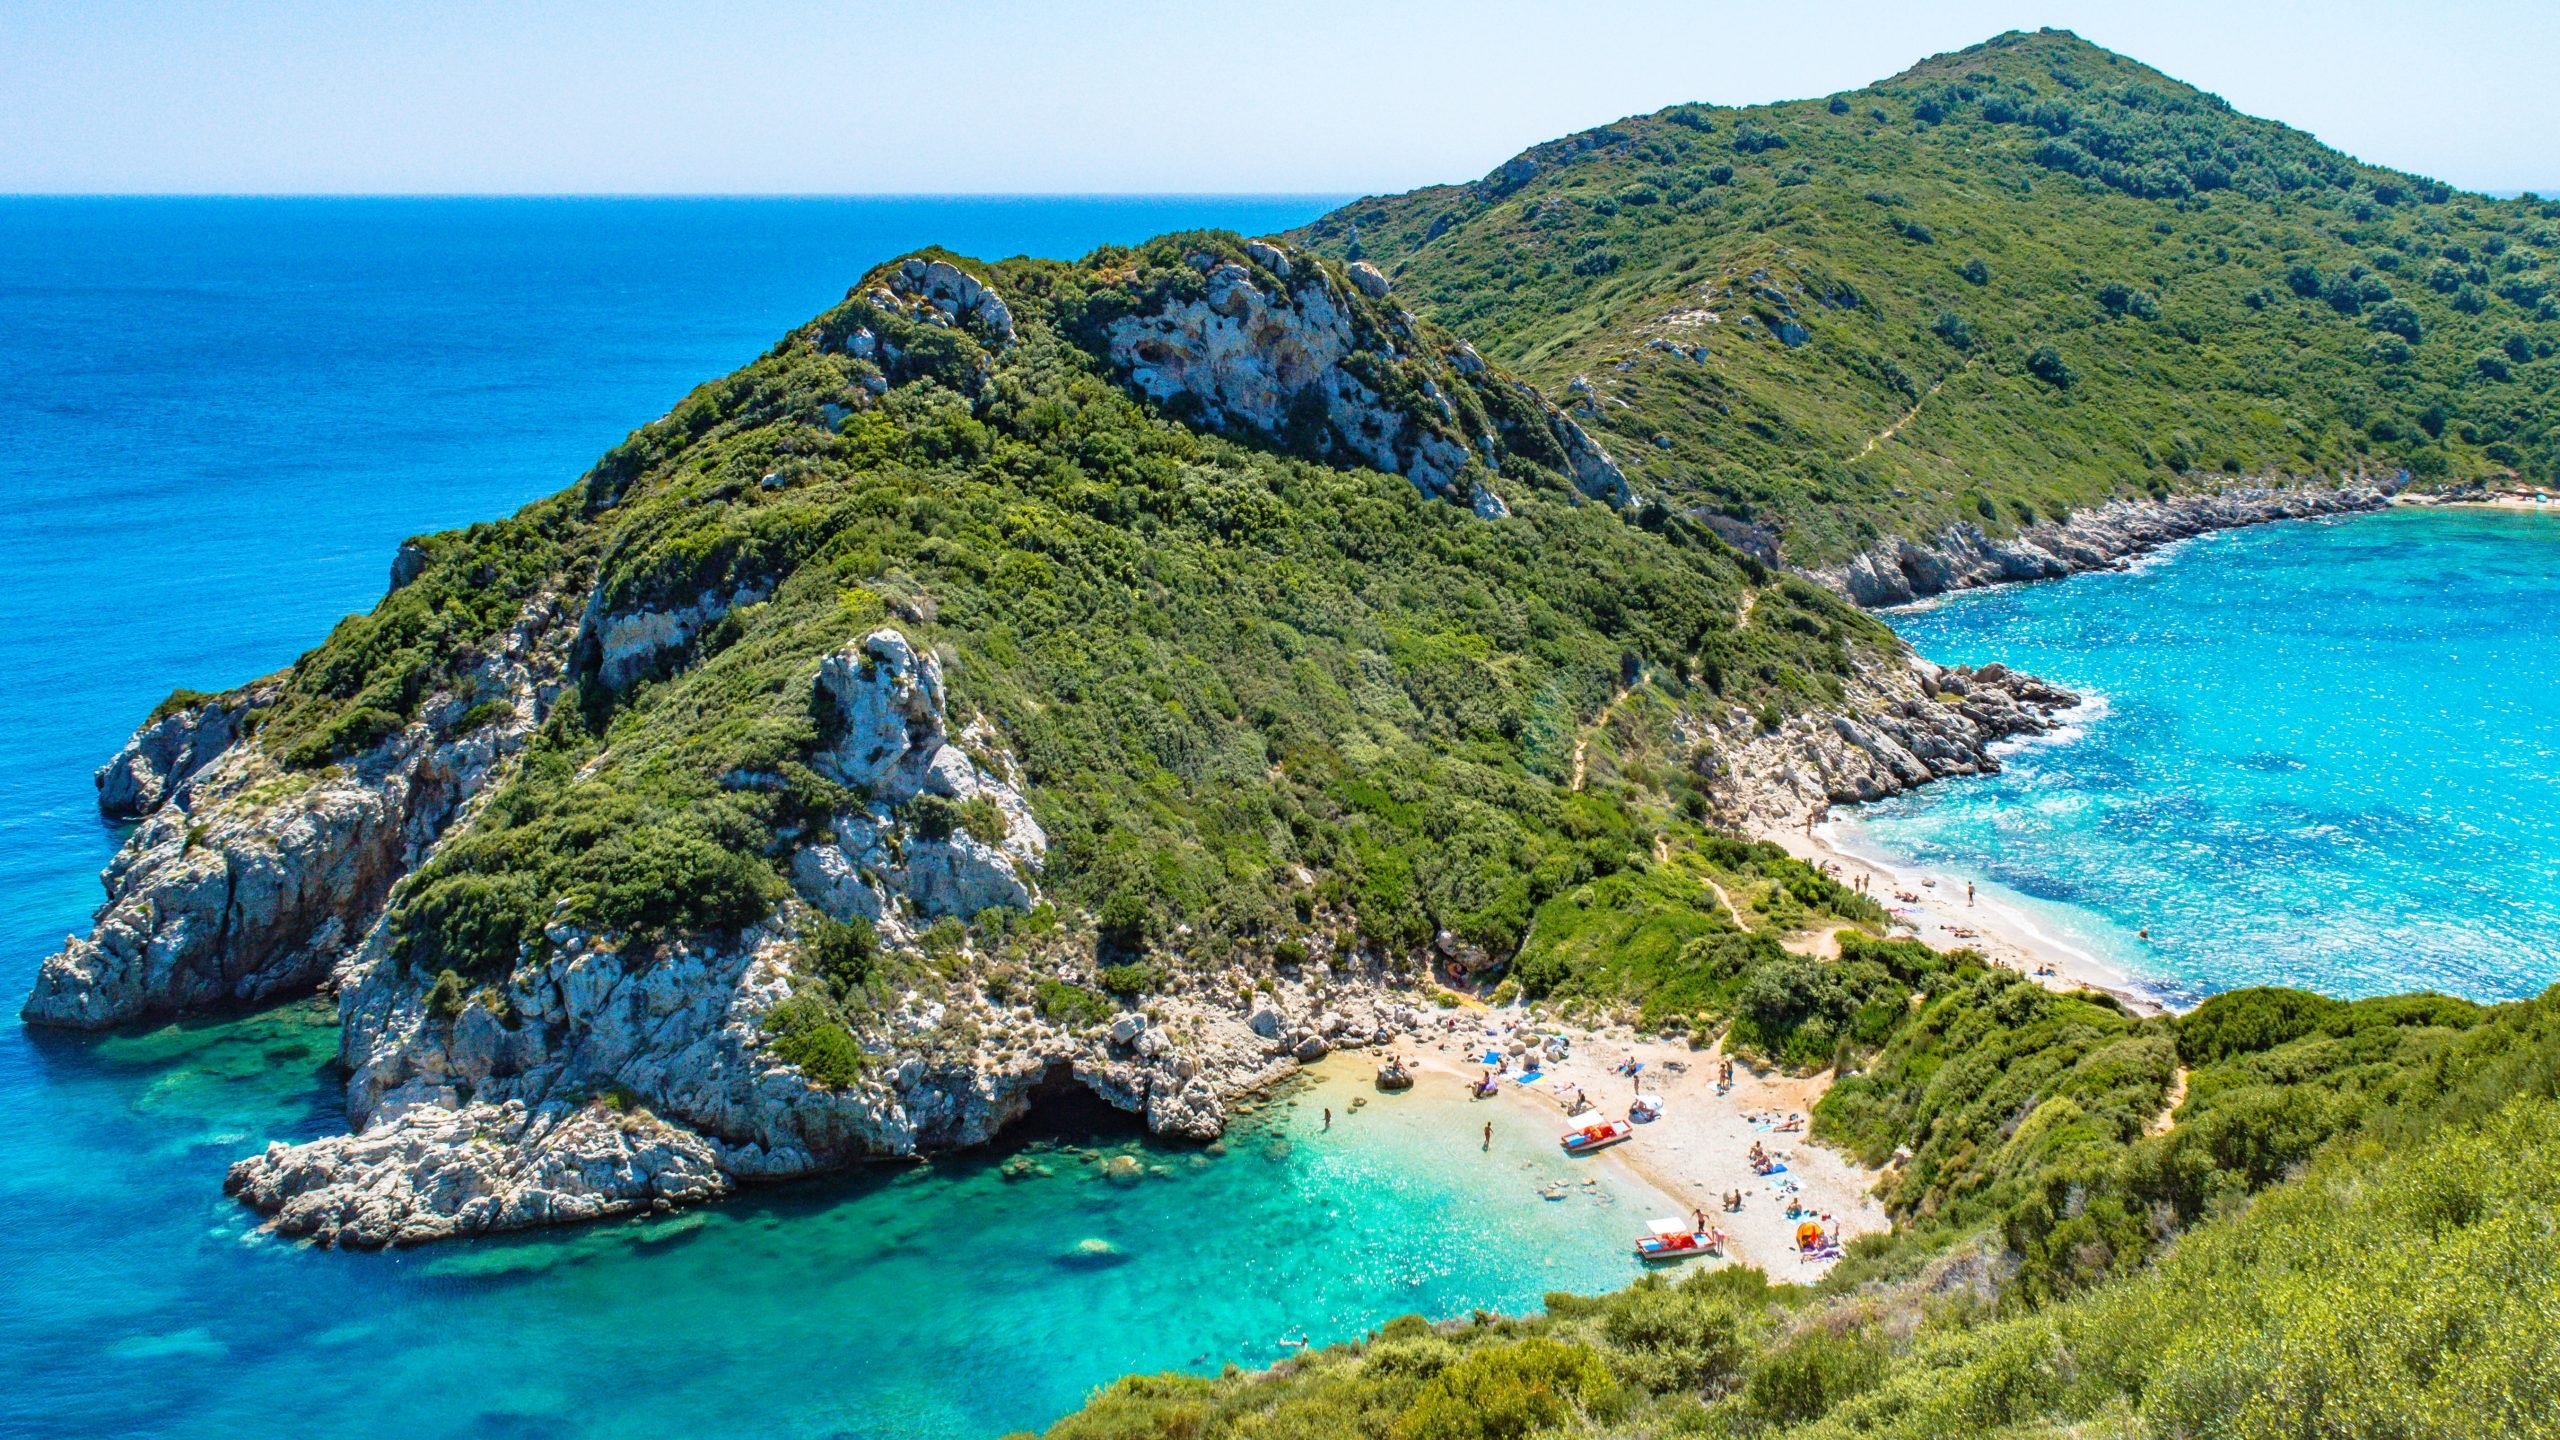 How To Get From Corfu Airport To Paleokastritsa - All Possible Ways, cheapest way from Corfu airport to Paleokastritsa, cheapest way from Corfu airport to Paleokastritsa, Corfu airport to Paleokastritsa, cheapest way from Corfu airport to Paleokastritsa town, Corfu airport to Paleokastritsa town, Corfu Bus Airport, bus from Corfu airport to Paleokastritsa town, taxi Corfu airport to Paleokastritsa, Uber Corfu airport to Paleokastritsa, Corfu airport to Paleokastritsa by bus